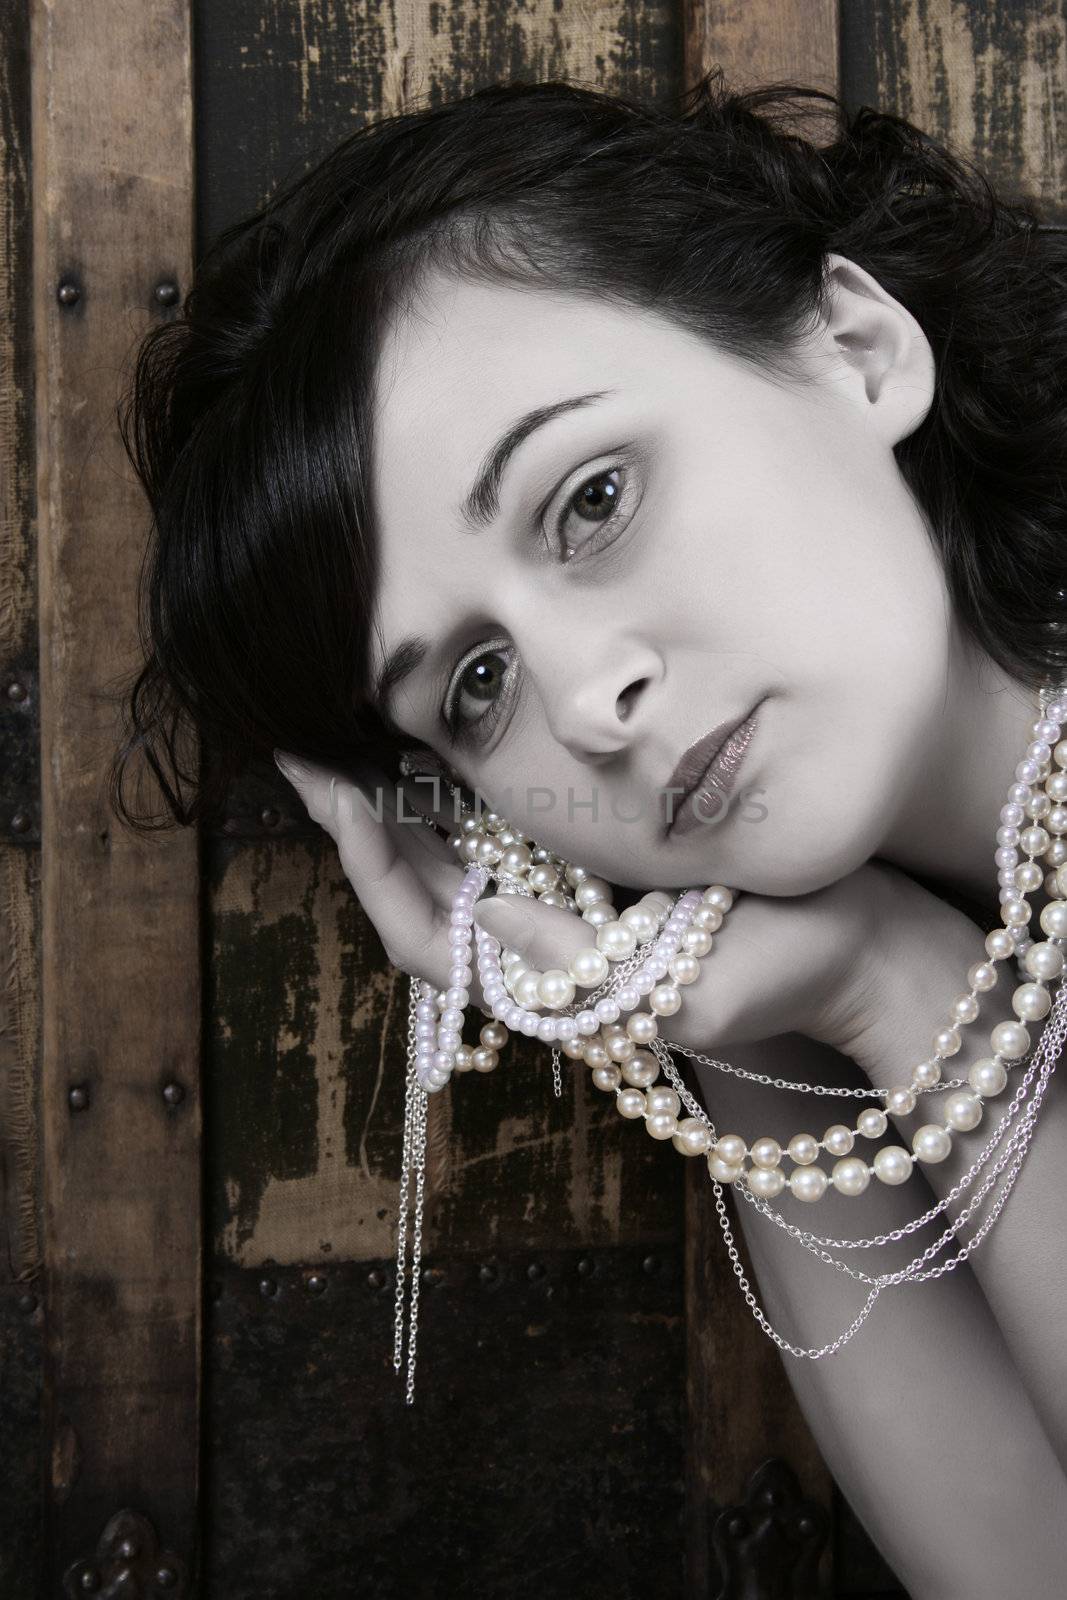 Beautiful brunette against a rugged antique chest with jewellery